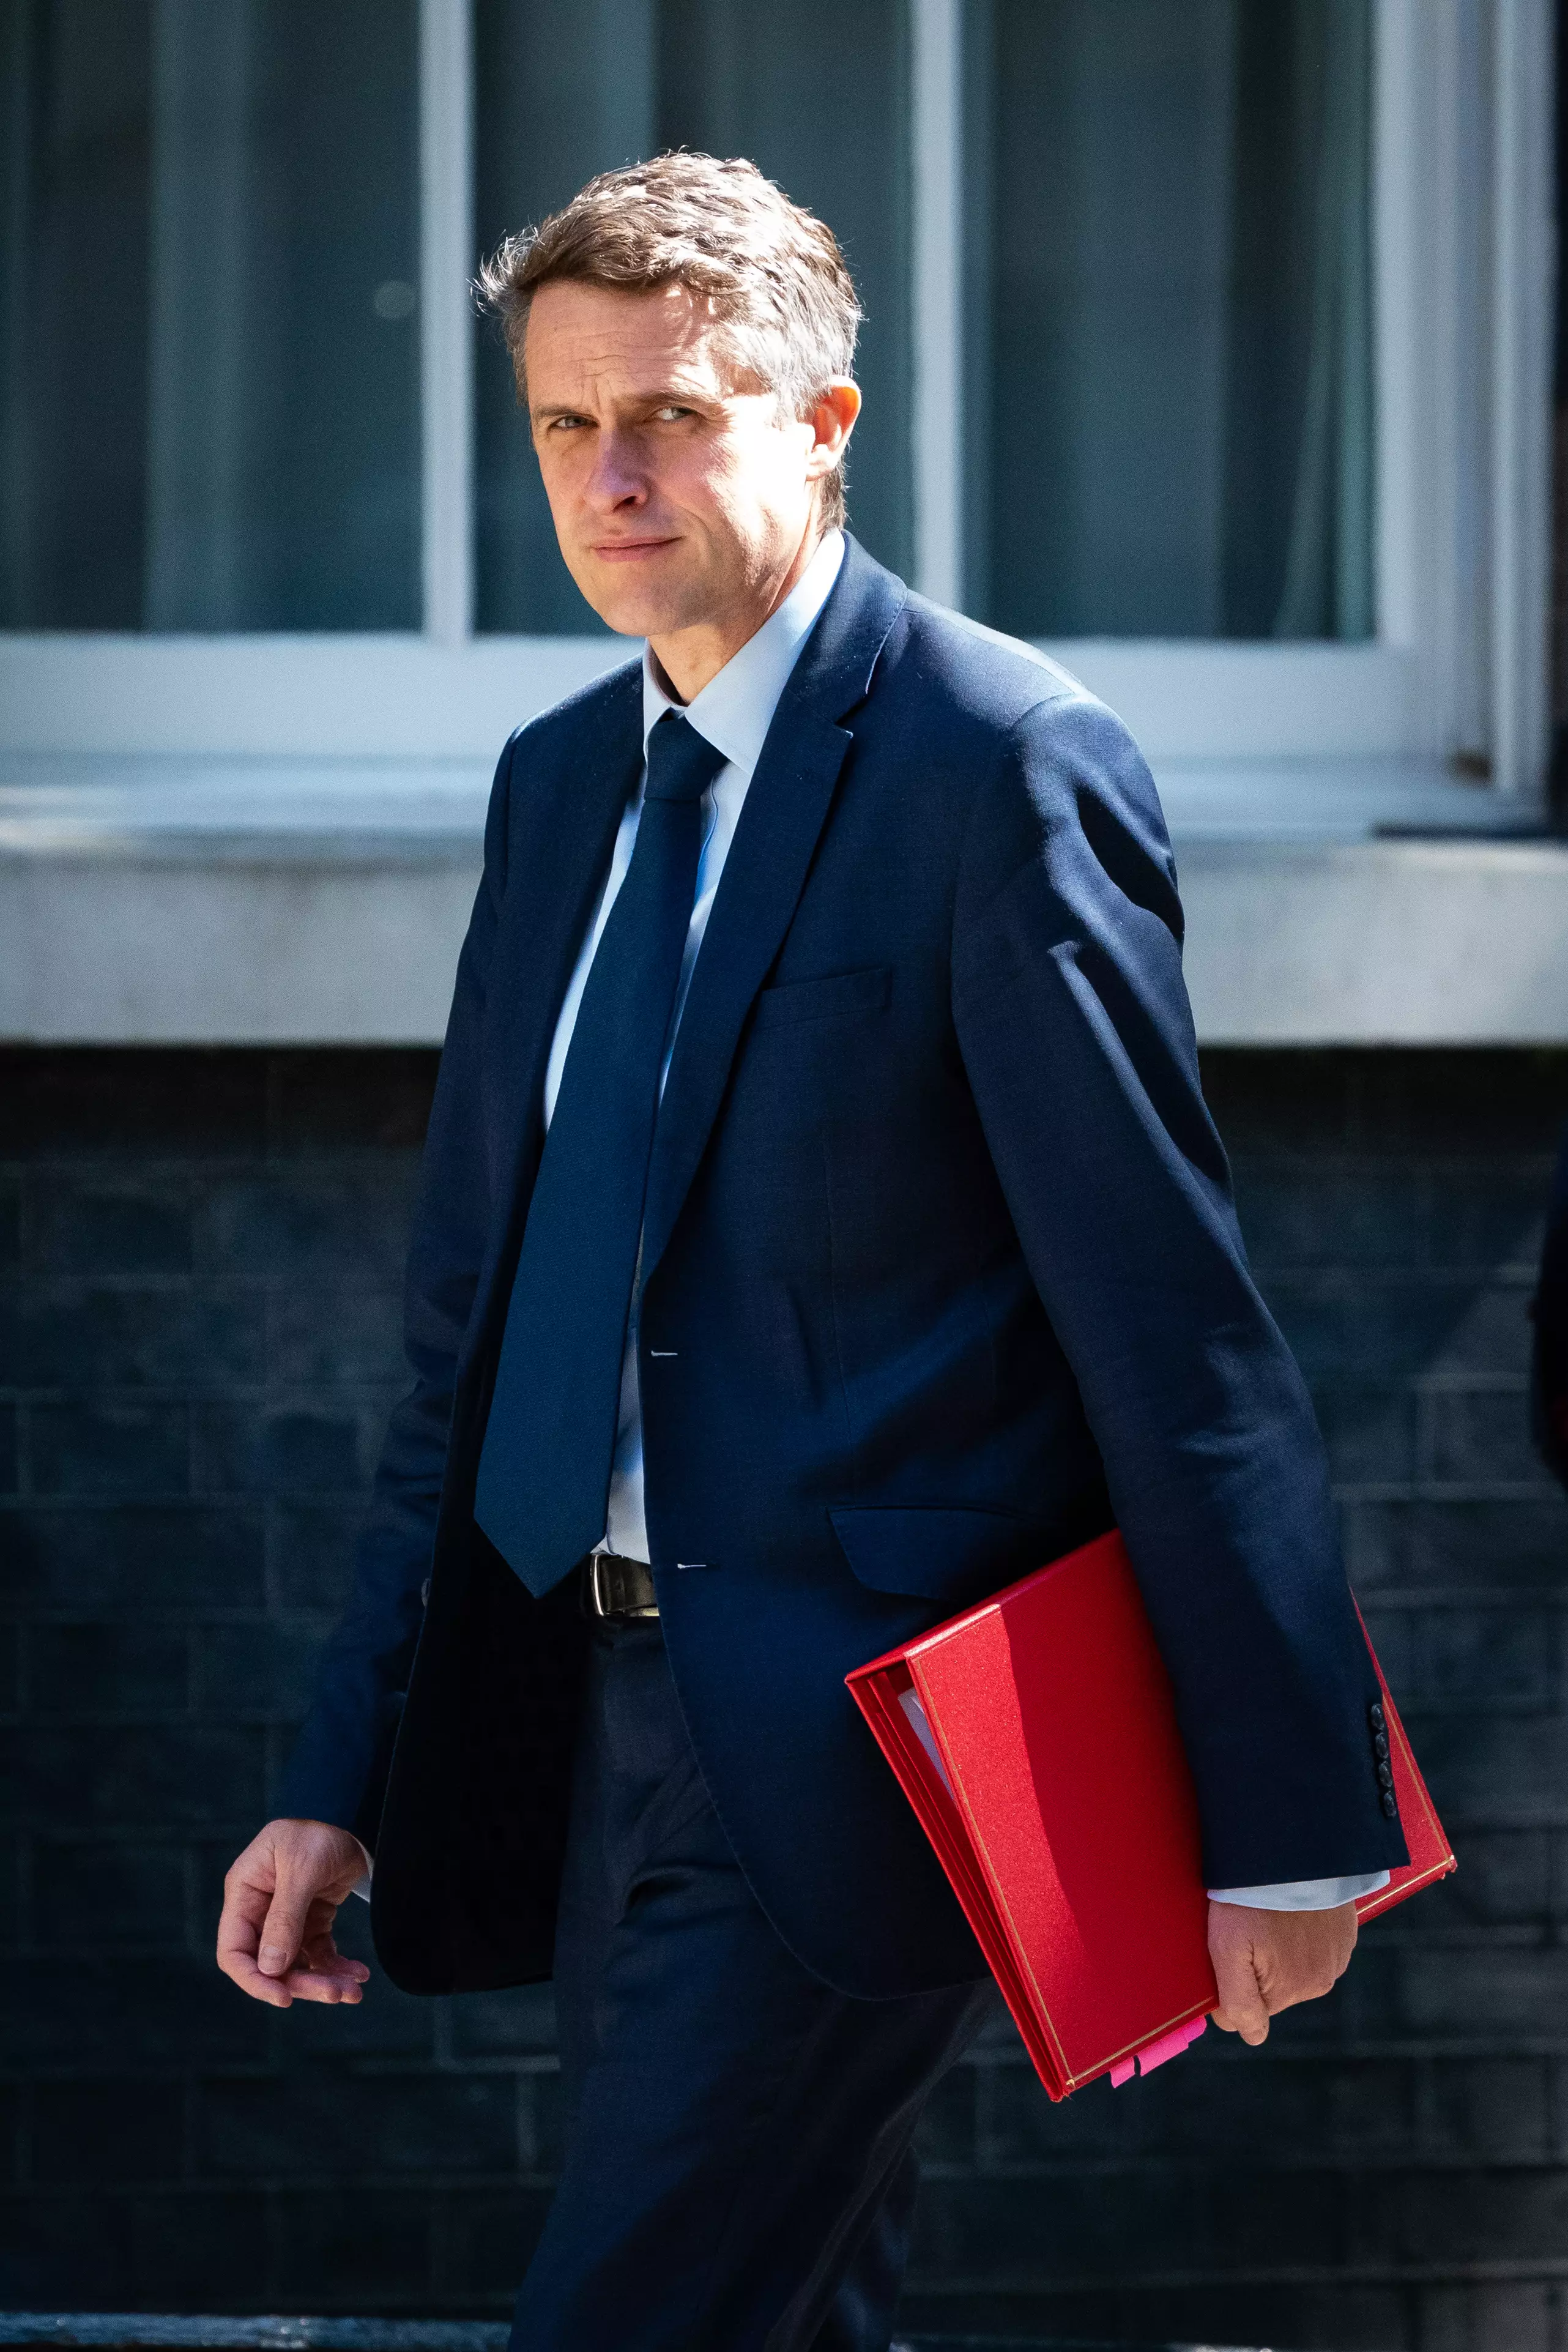 Education Secretary Gavin Williamson has been criticised for his handling of this year's exams.